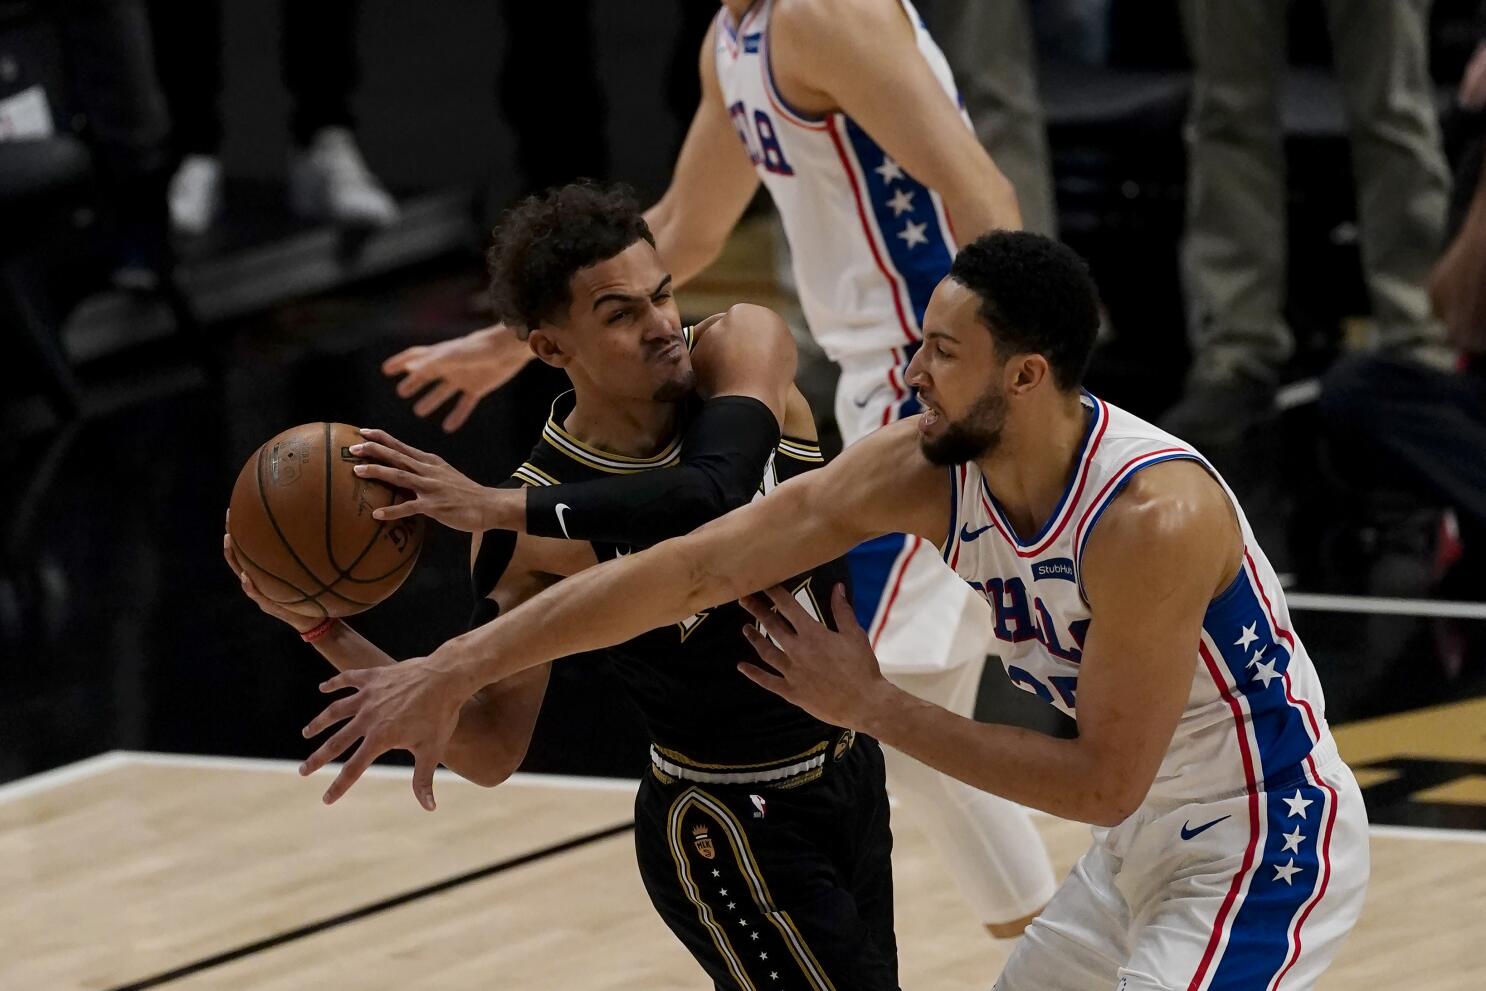 We did have some fun playing some GM scenarios - Danny Green